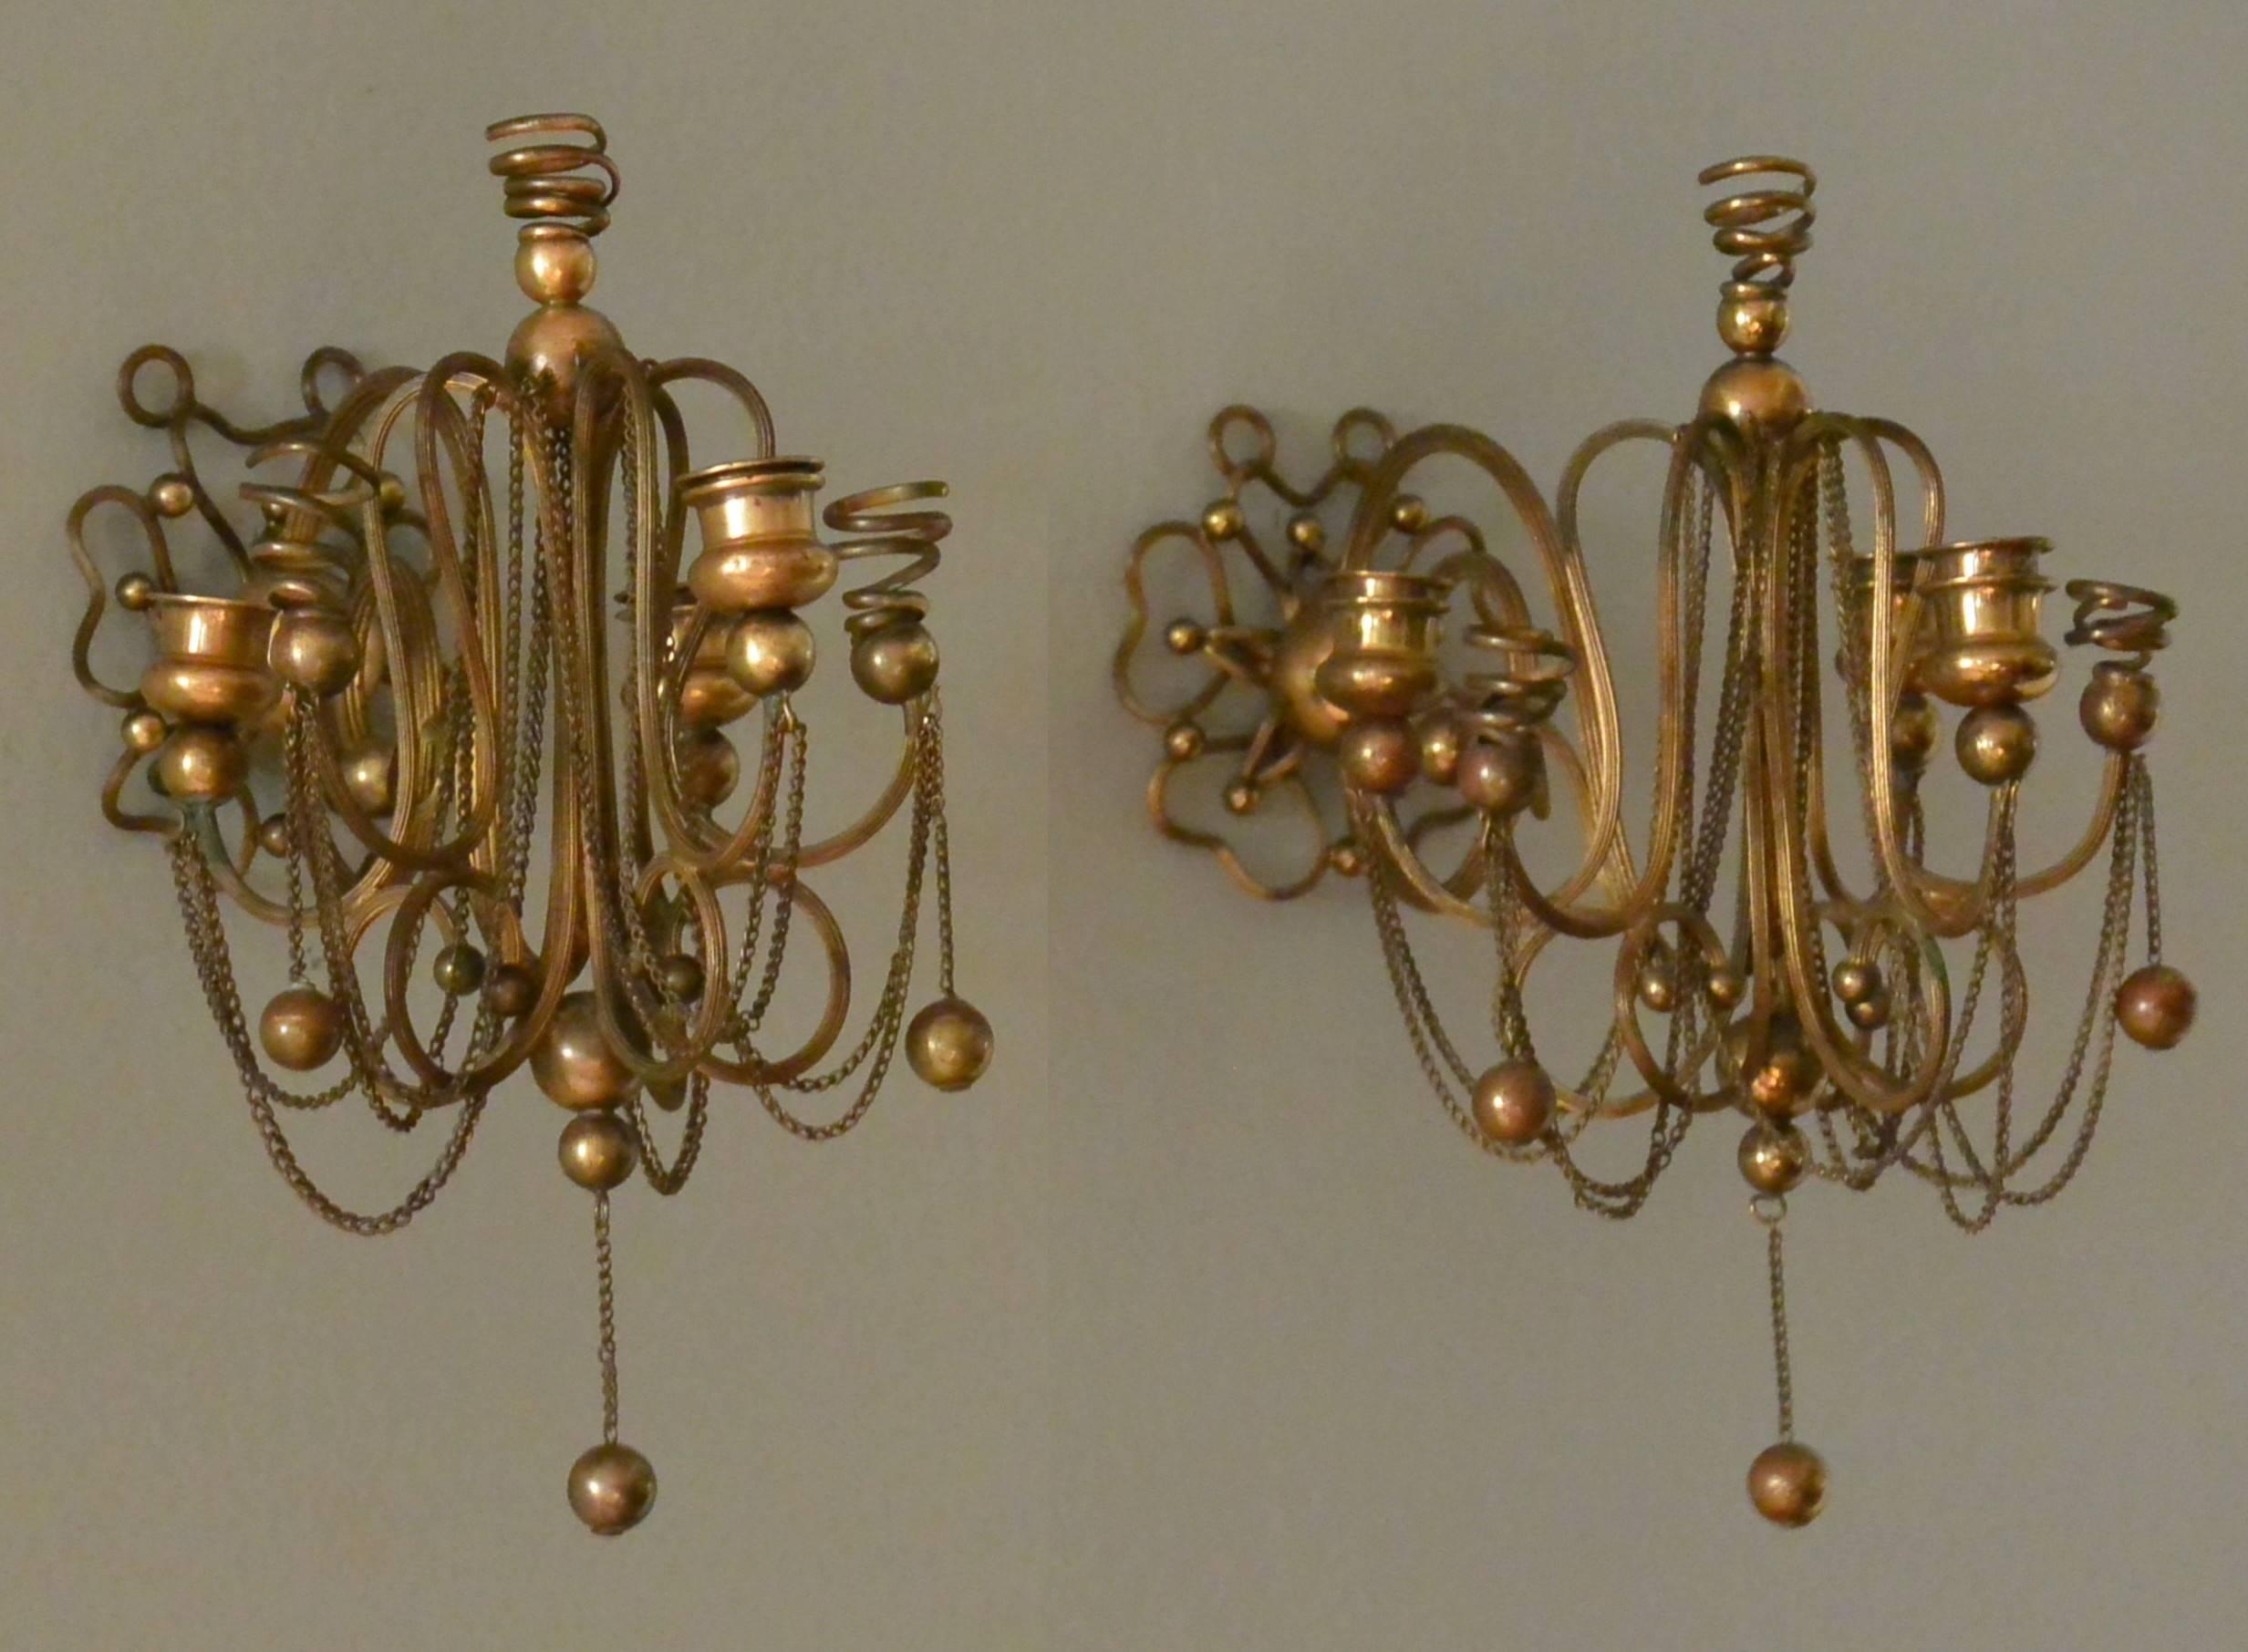 19th Century Continental Brass Ball and Chain Candle Sconces For Sale